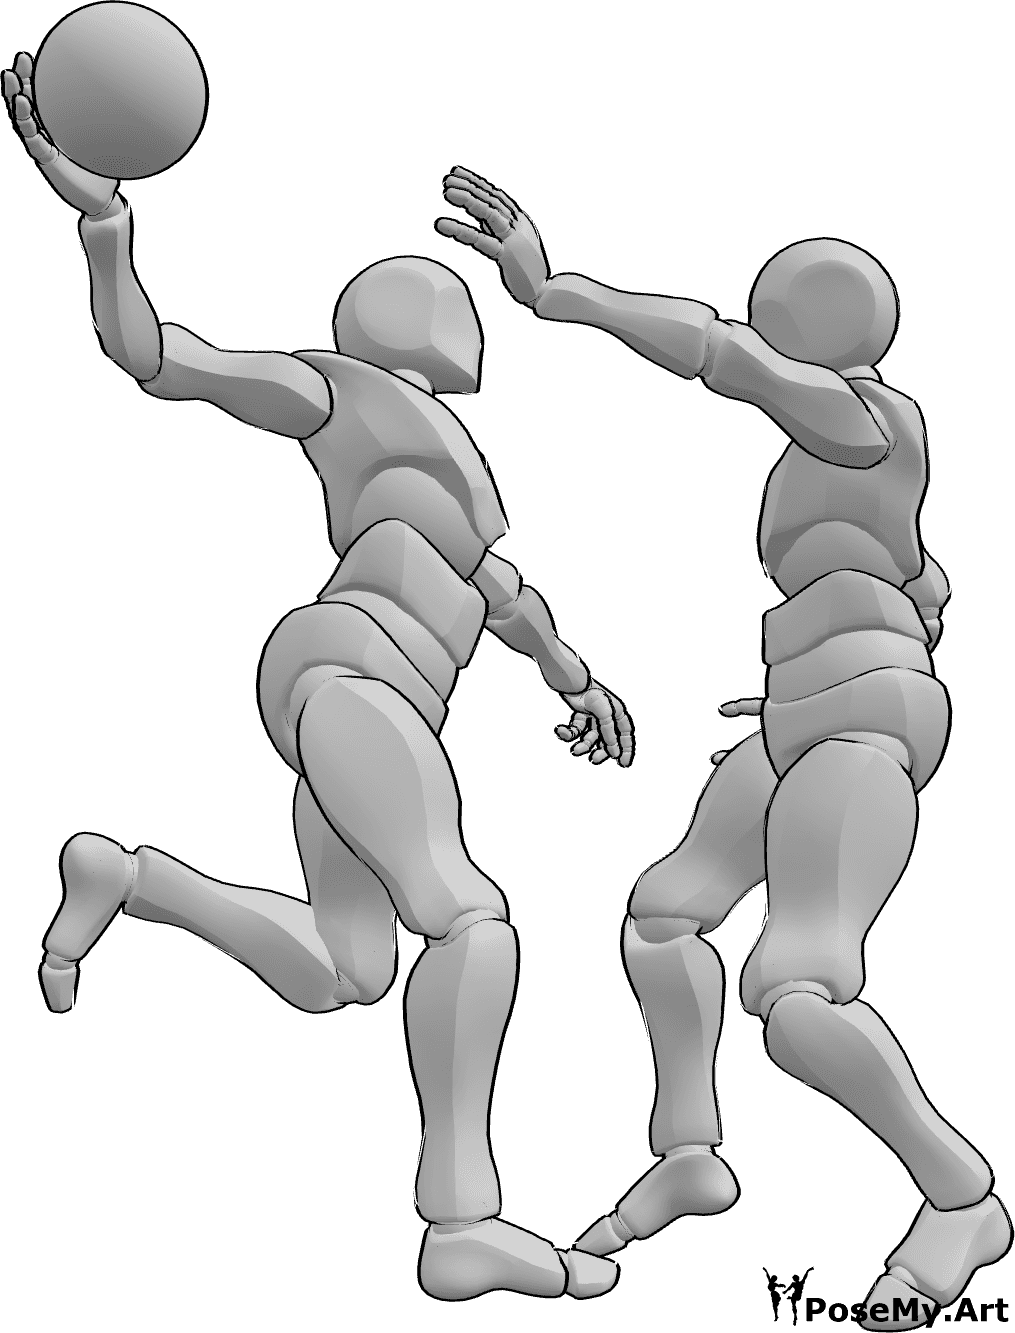 Pose Reference- Male players passing pose - Two males are playing handball, one of them is jumping and passing the ball